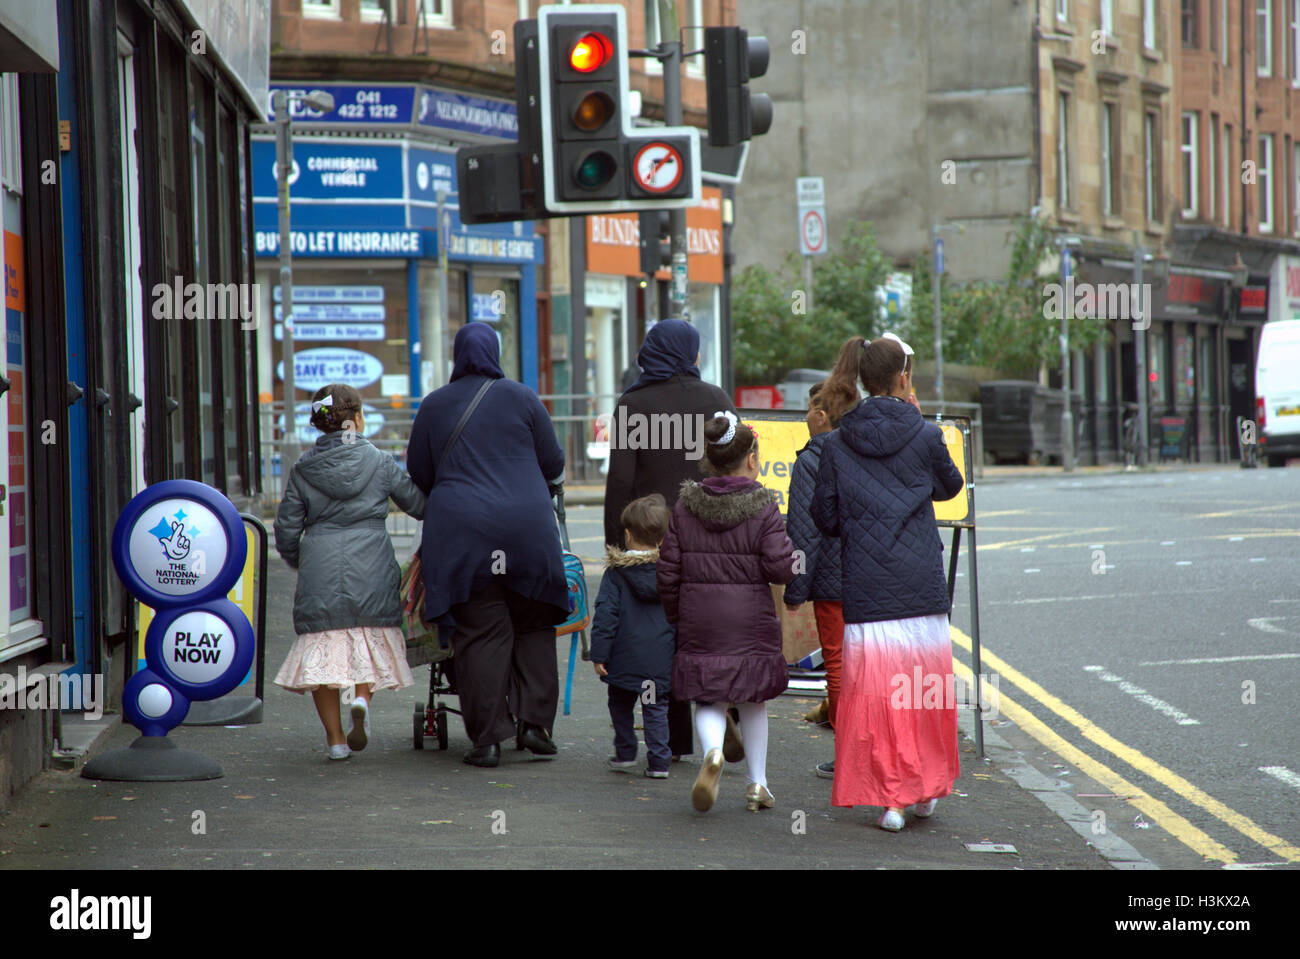 Asian family refugee dressed Hijab scarf on street in the UK everyday scene lottery signs Stock Photo